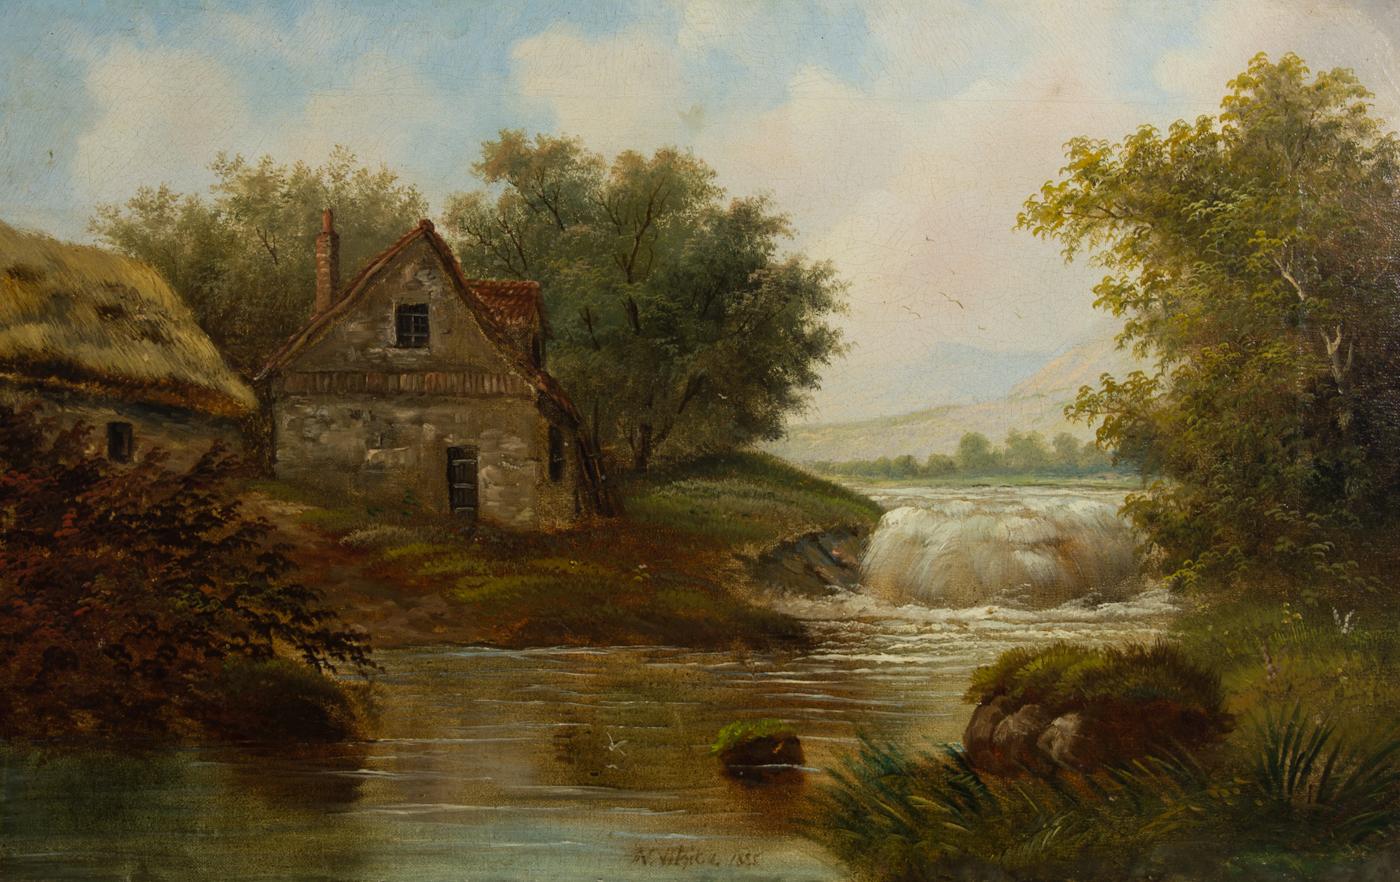 M. White - 1885 Oil, River Cottage - Painting by John M. White